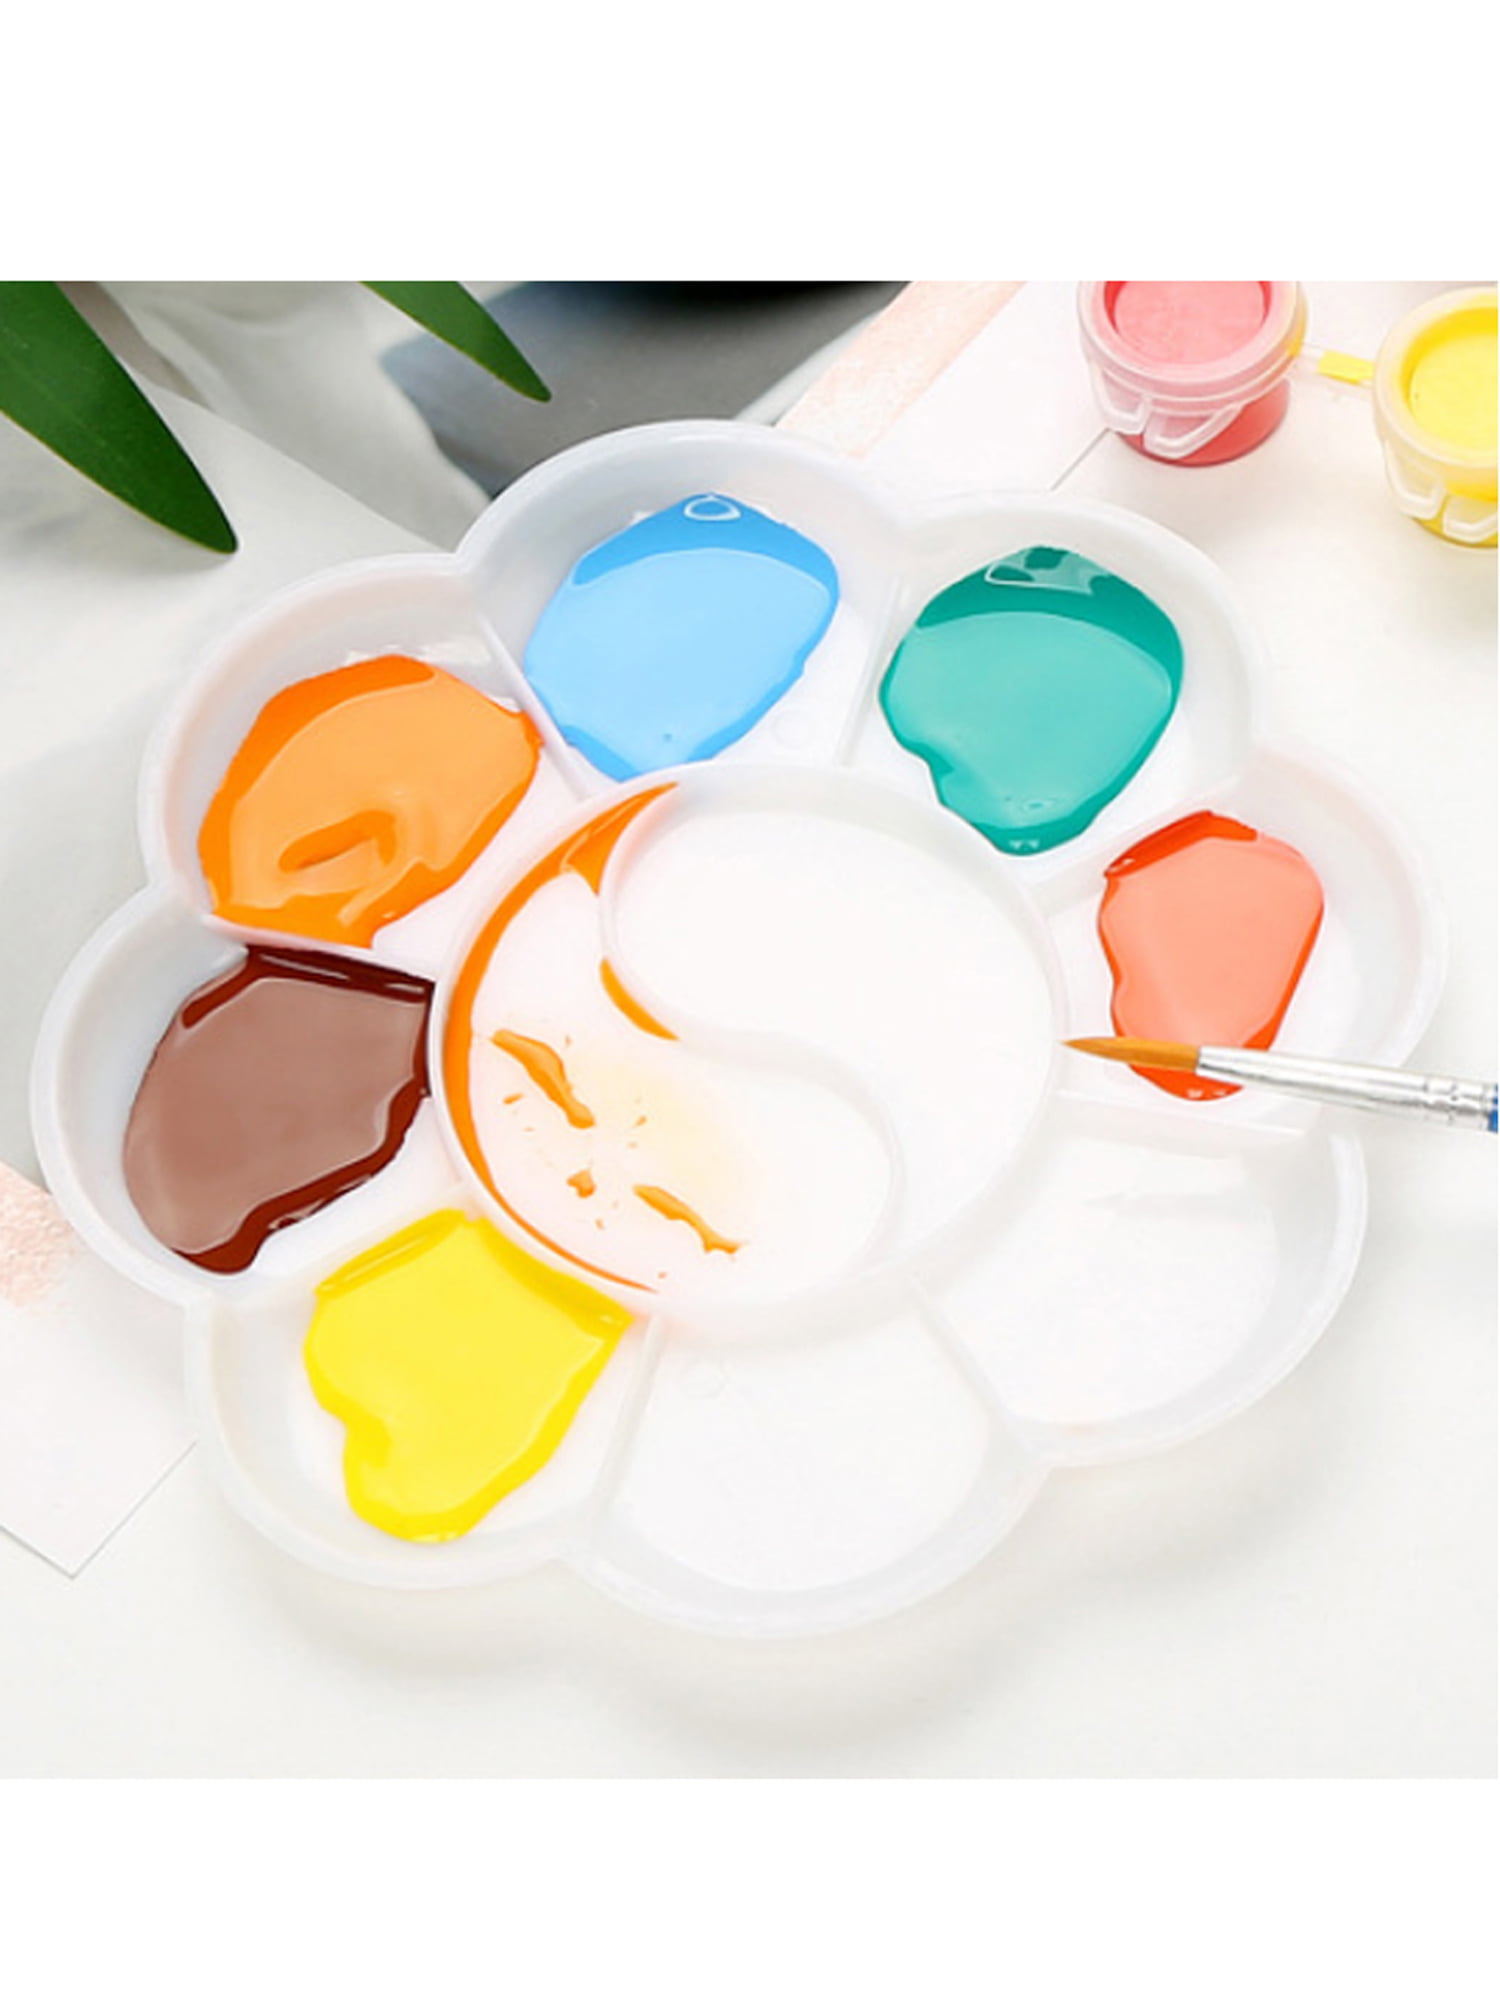 Blue WeiMay Round Professional Plastic Paint Platte Tray for Kids and Adult for Watercolor and Oil Painting Art Making Palette Painting 